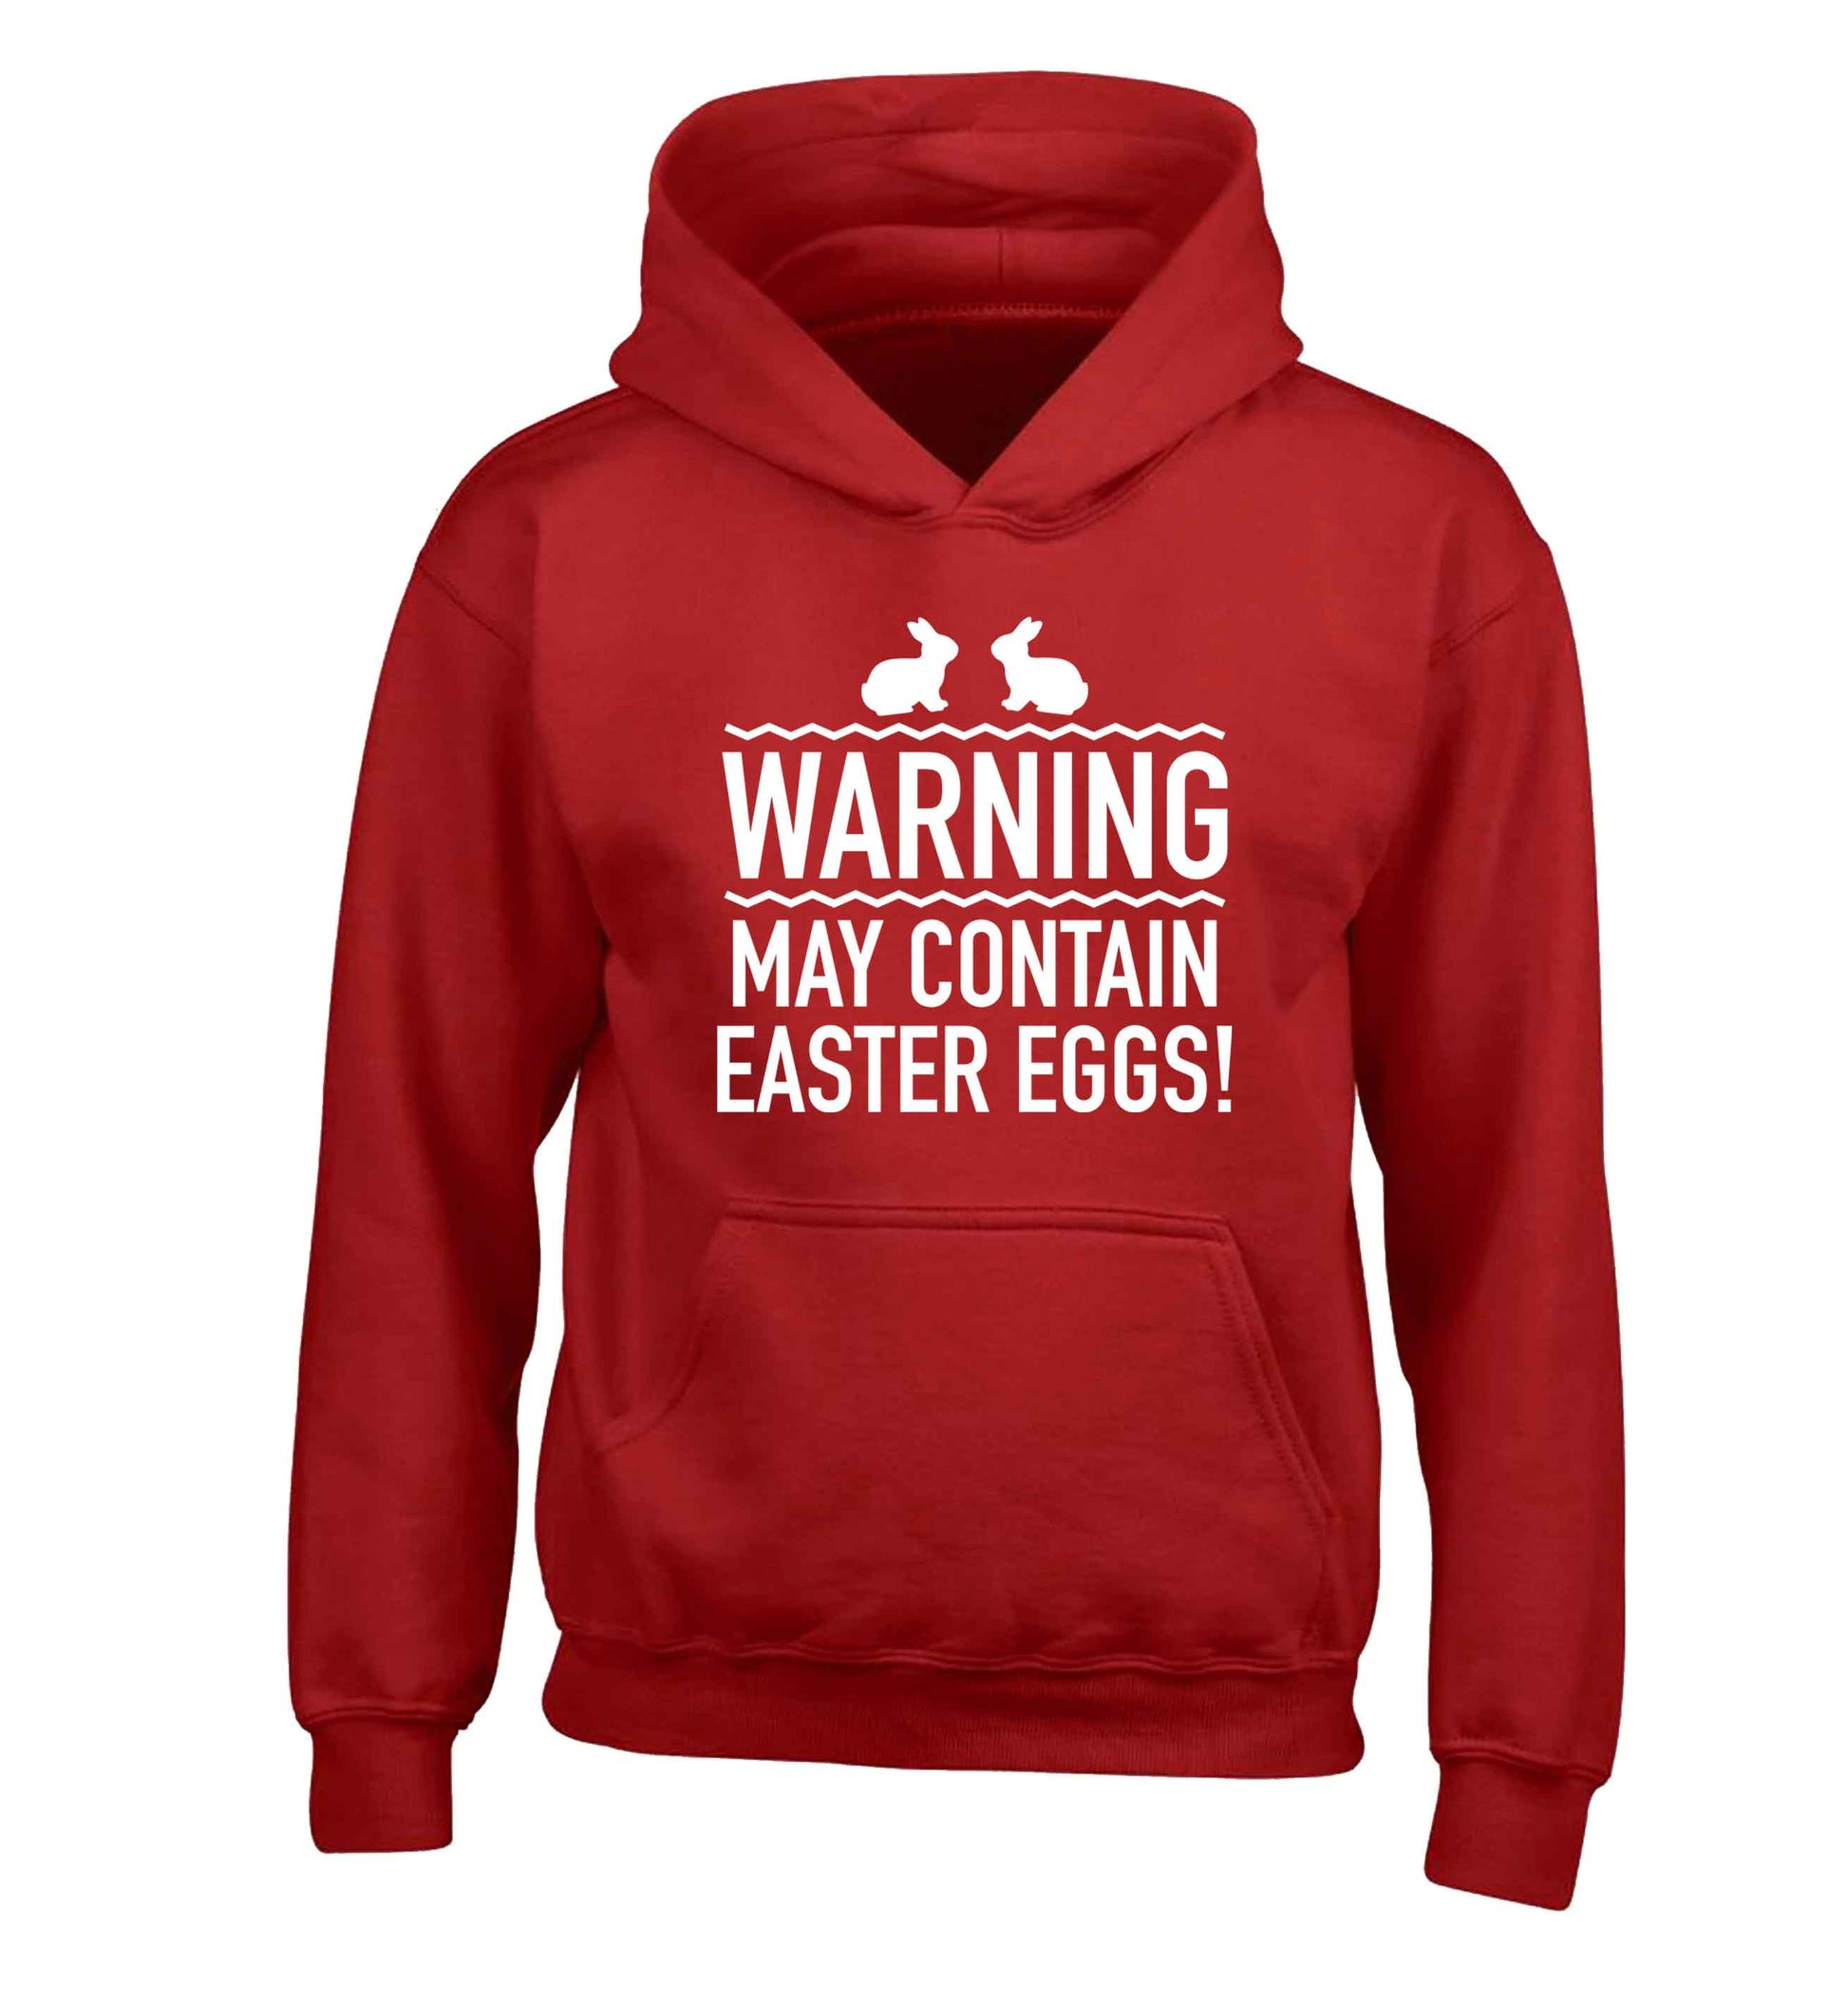 Warning may contain Easter eggs children's red hoodie 12-13 Years